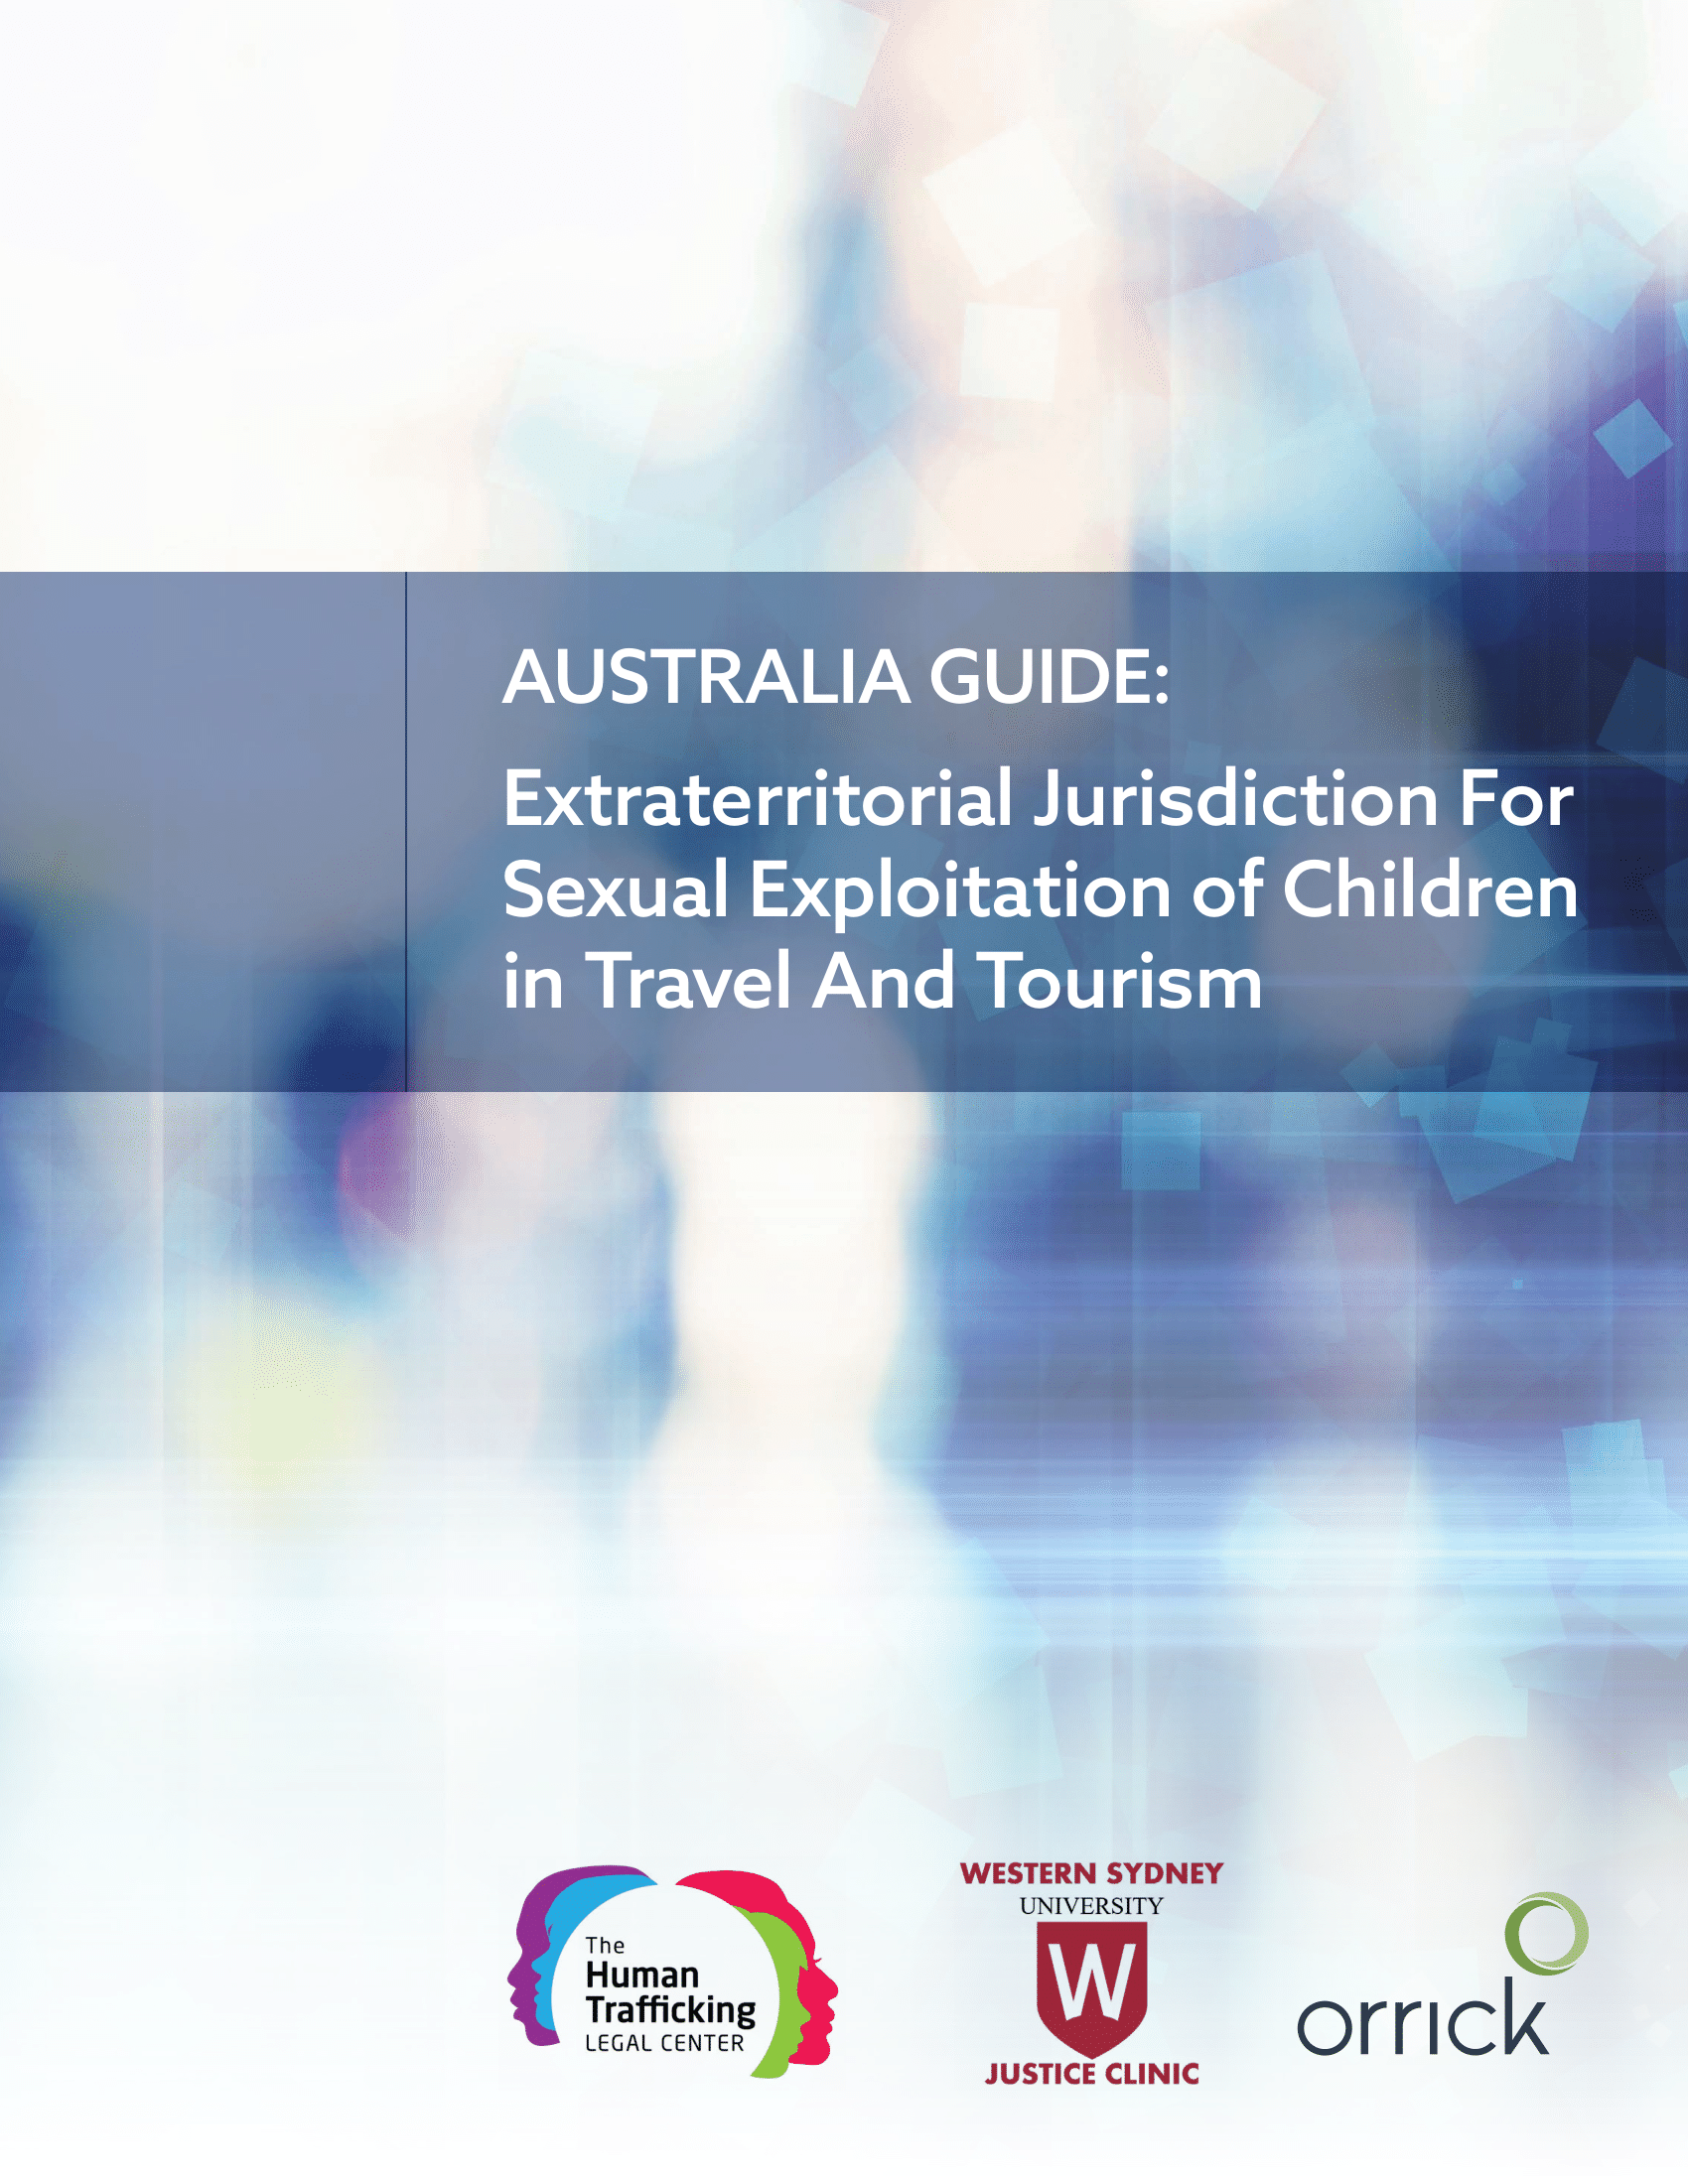 AUSTRALIA GUIDE: Extraterritorial Jurisdiction For Sexual Exploitation of Children in Travel And Tourism